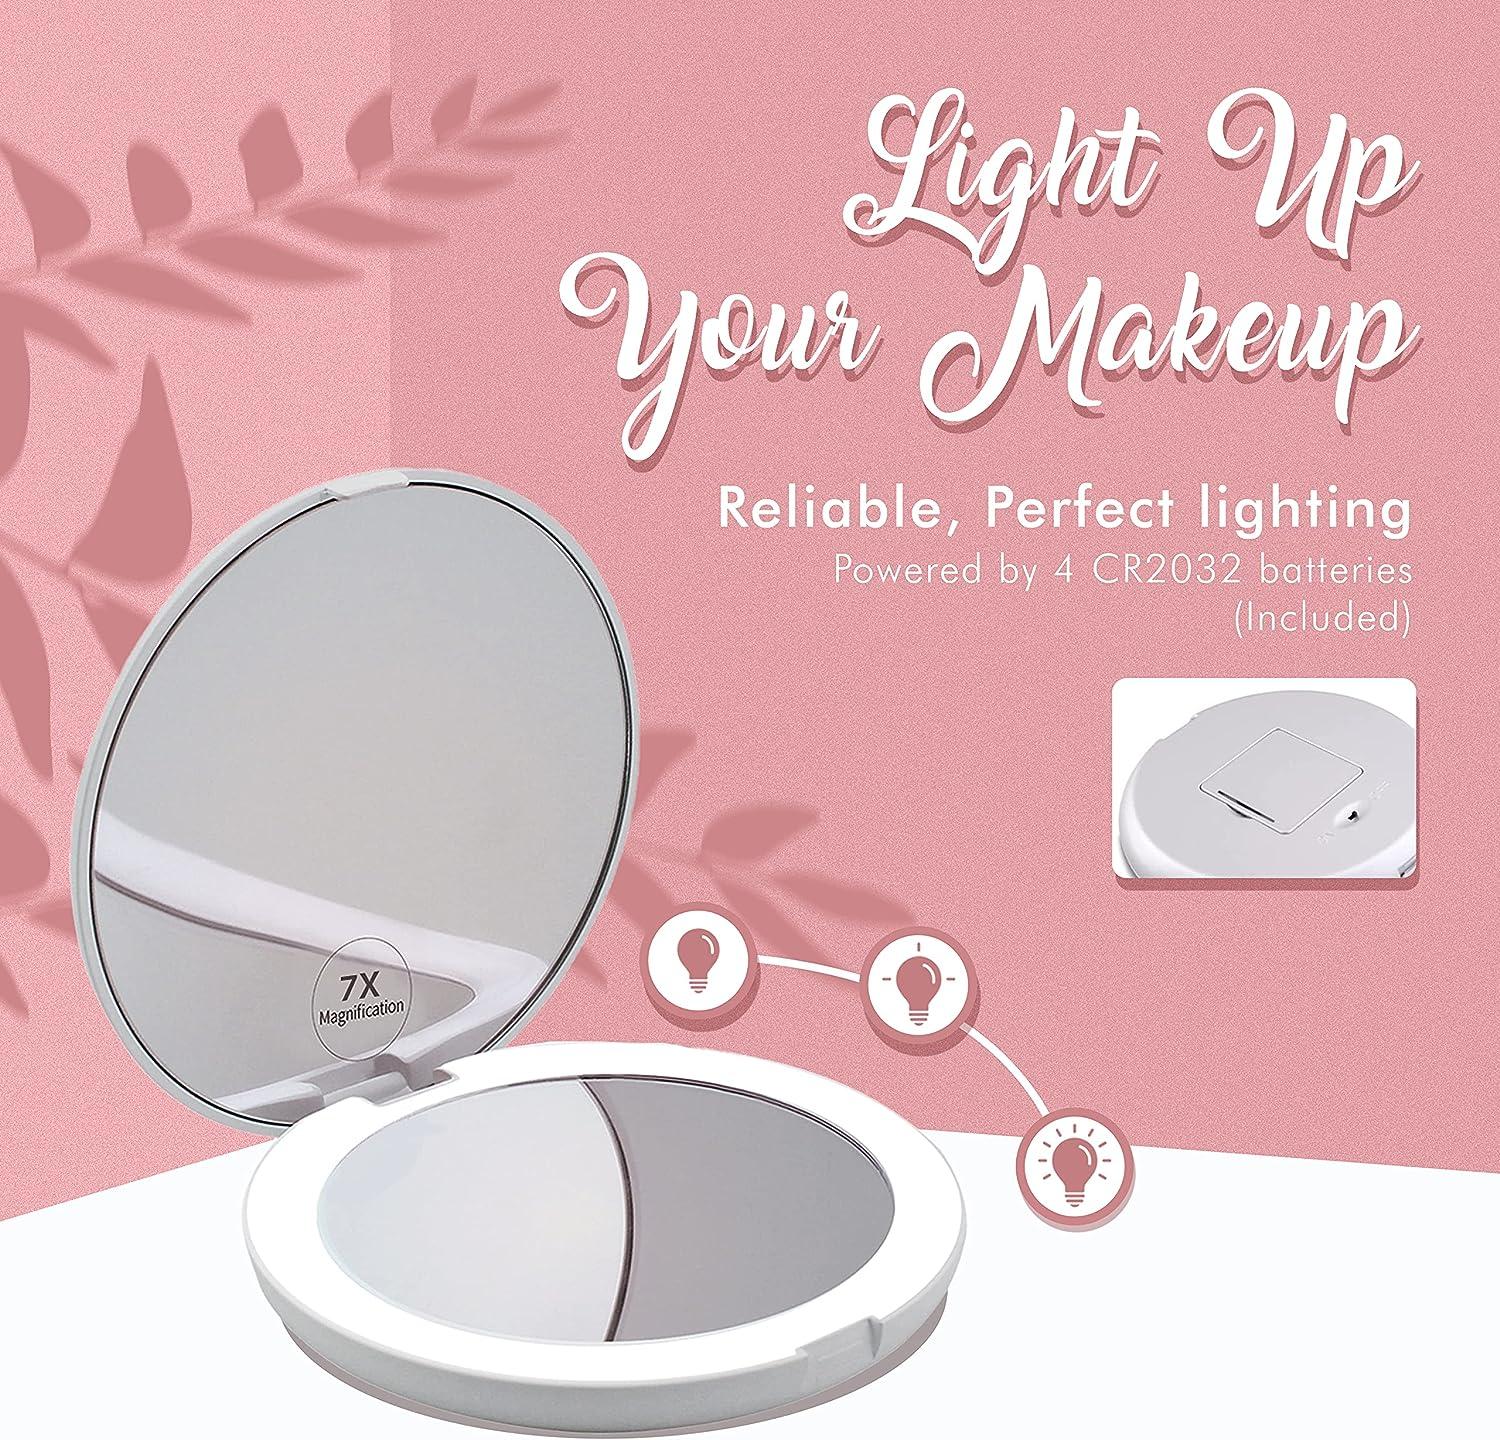 MIRRORVANA LED Lighted Travel Mirror with 7X/1X Magnification - Light Up Compact Makeup Mirror - Small Portable Circle Mirror for Pocket or Purse - 5